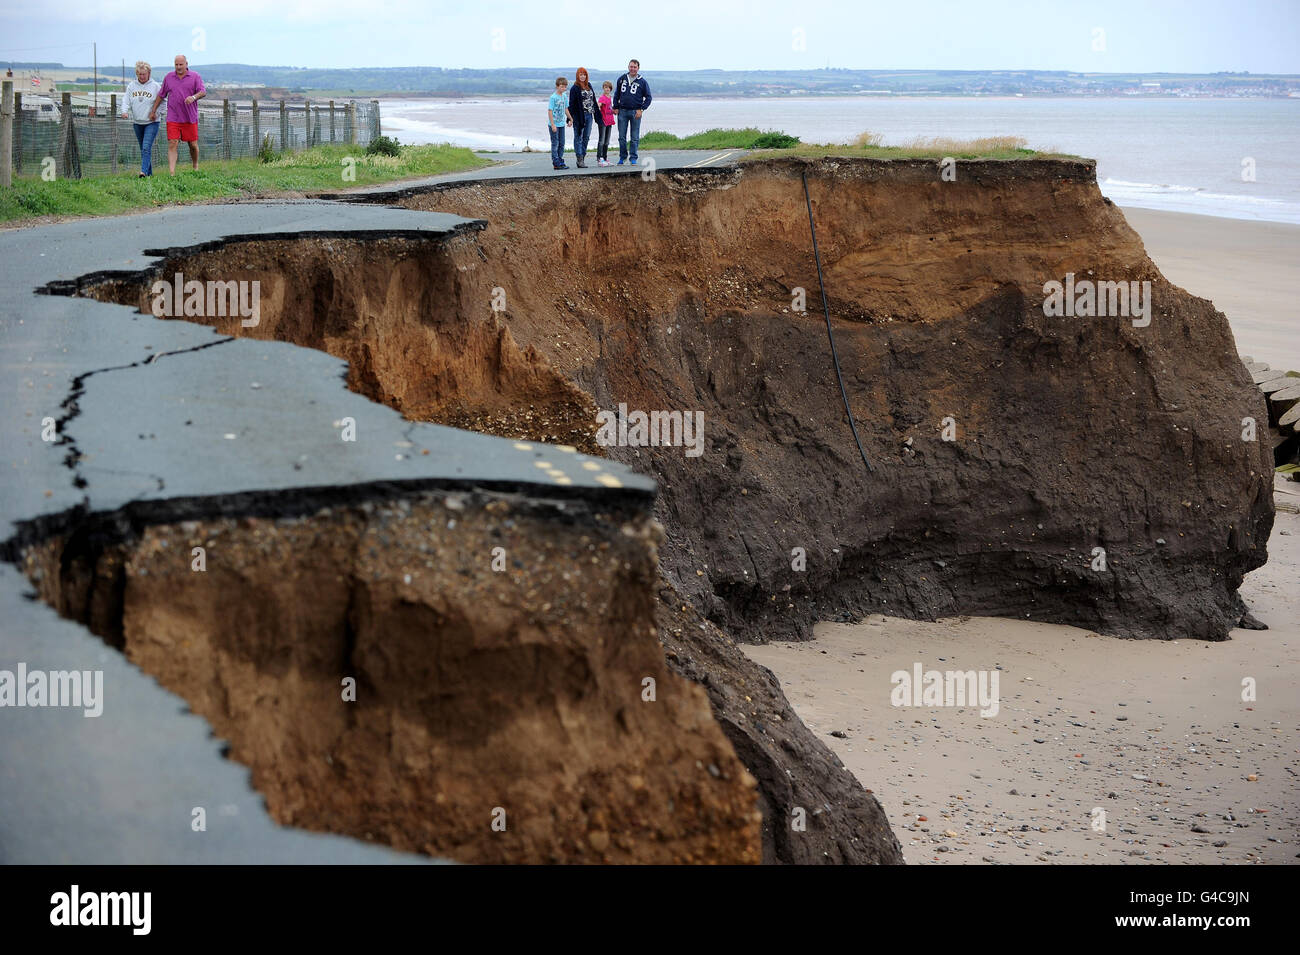 STANDALONE Photo. A cliff road in Skipsea, East Yorkshire, which has nearly completely washed away from coastal erosion. Stock Photo